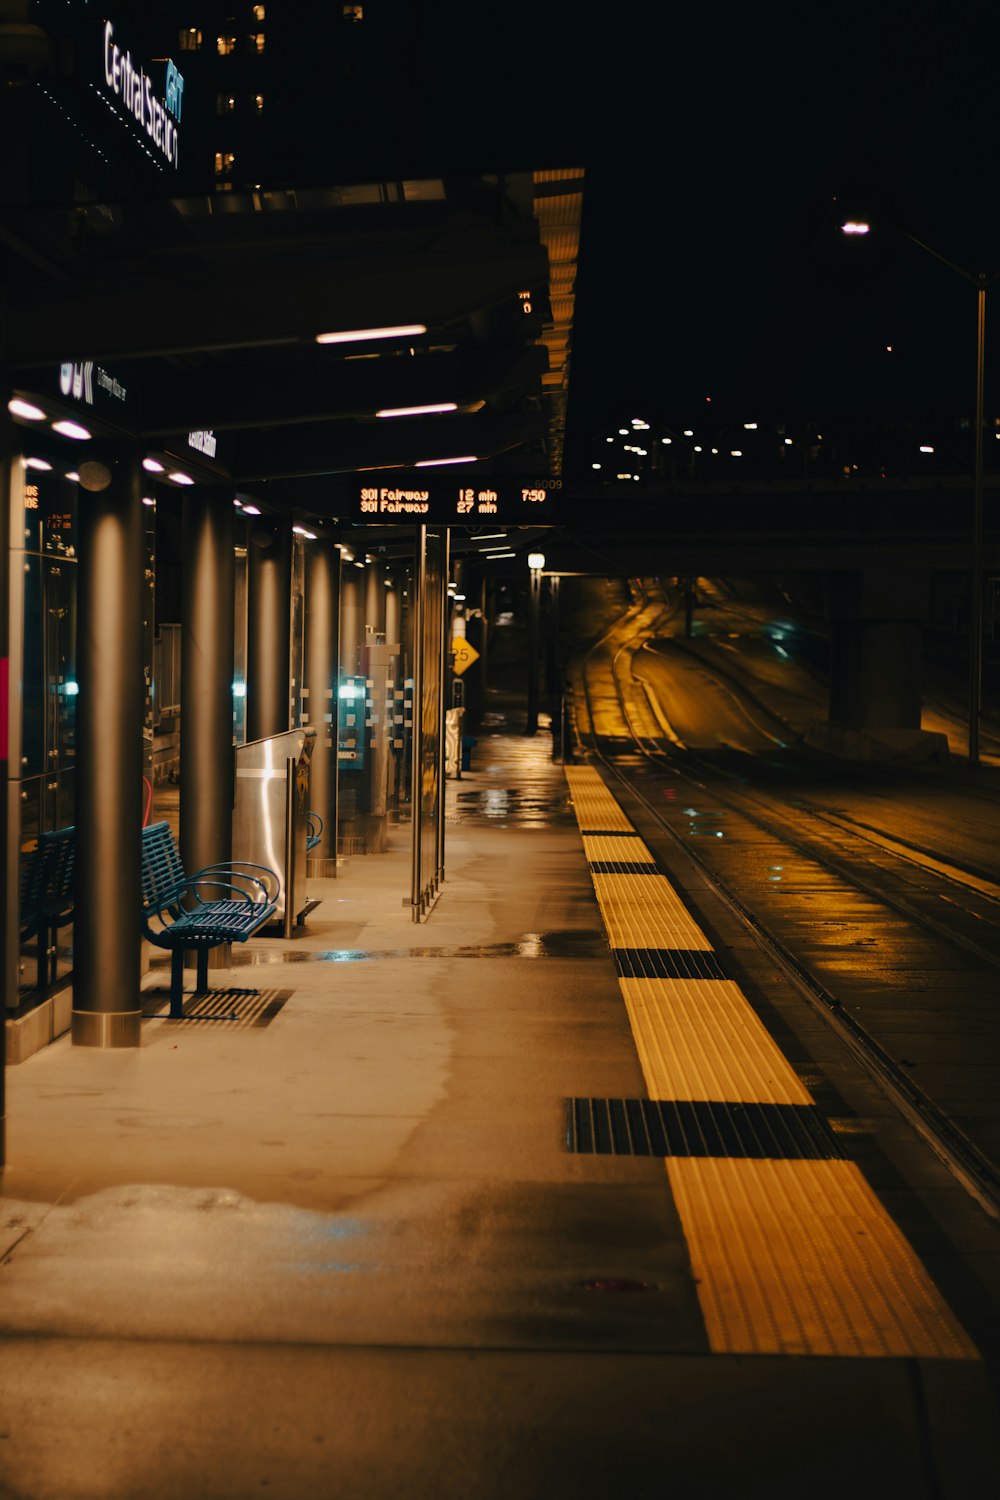 a bench sitting on the side of a train station